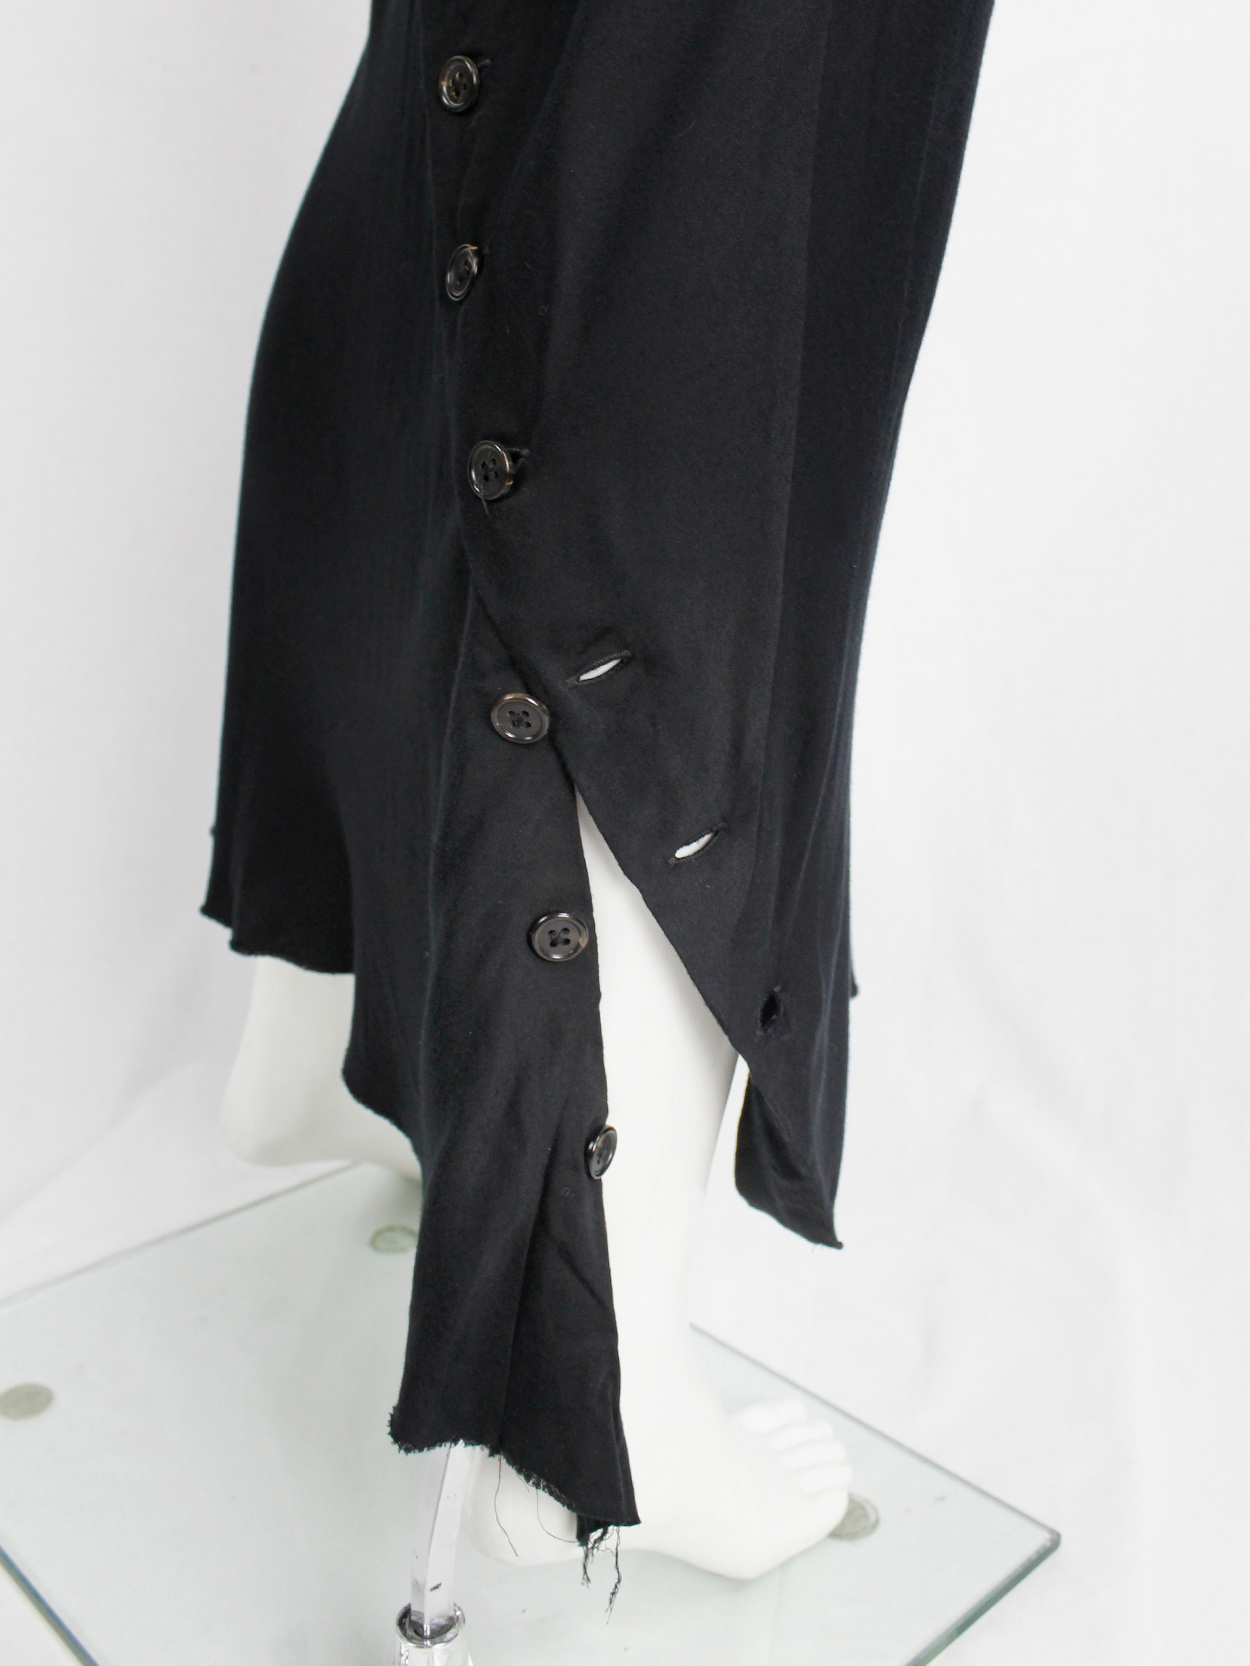 Ann Demeulemeester black maxi skirt with buttons twisting around it fall 2010 (14)